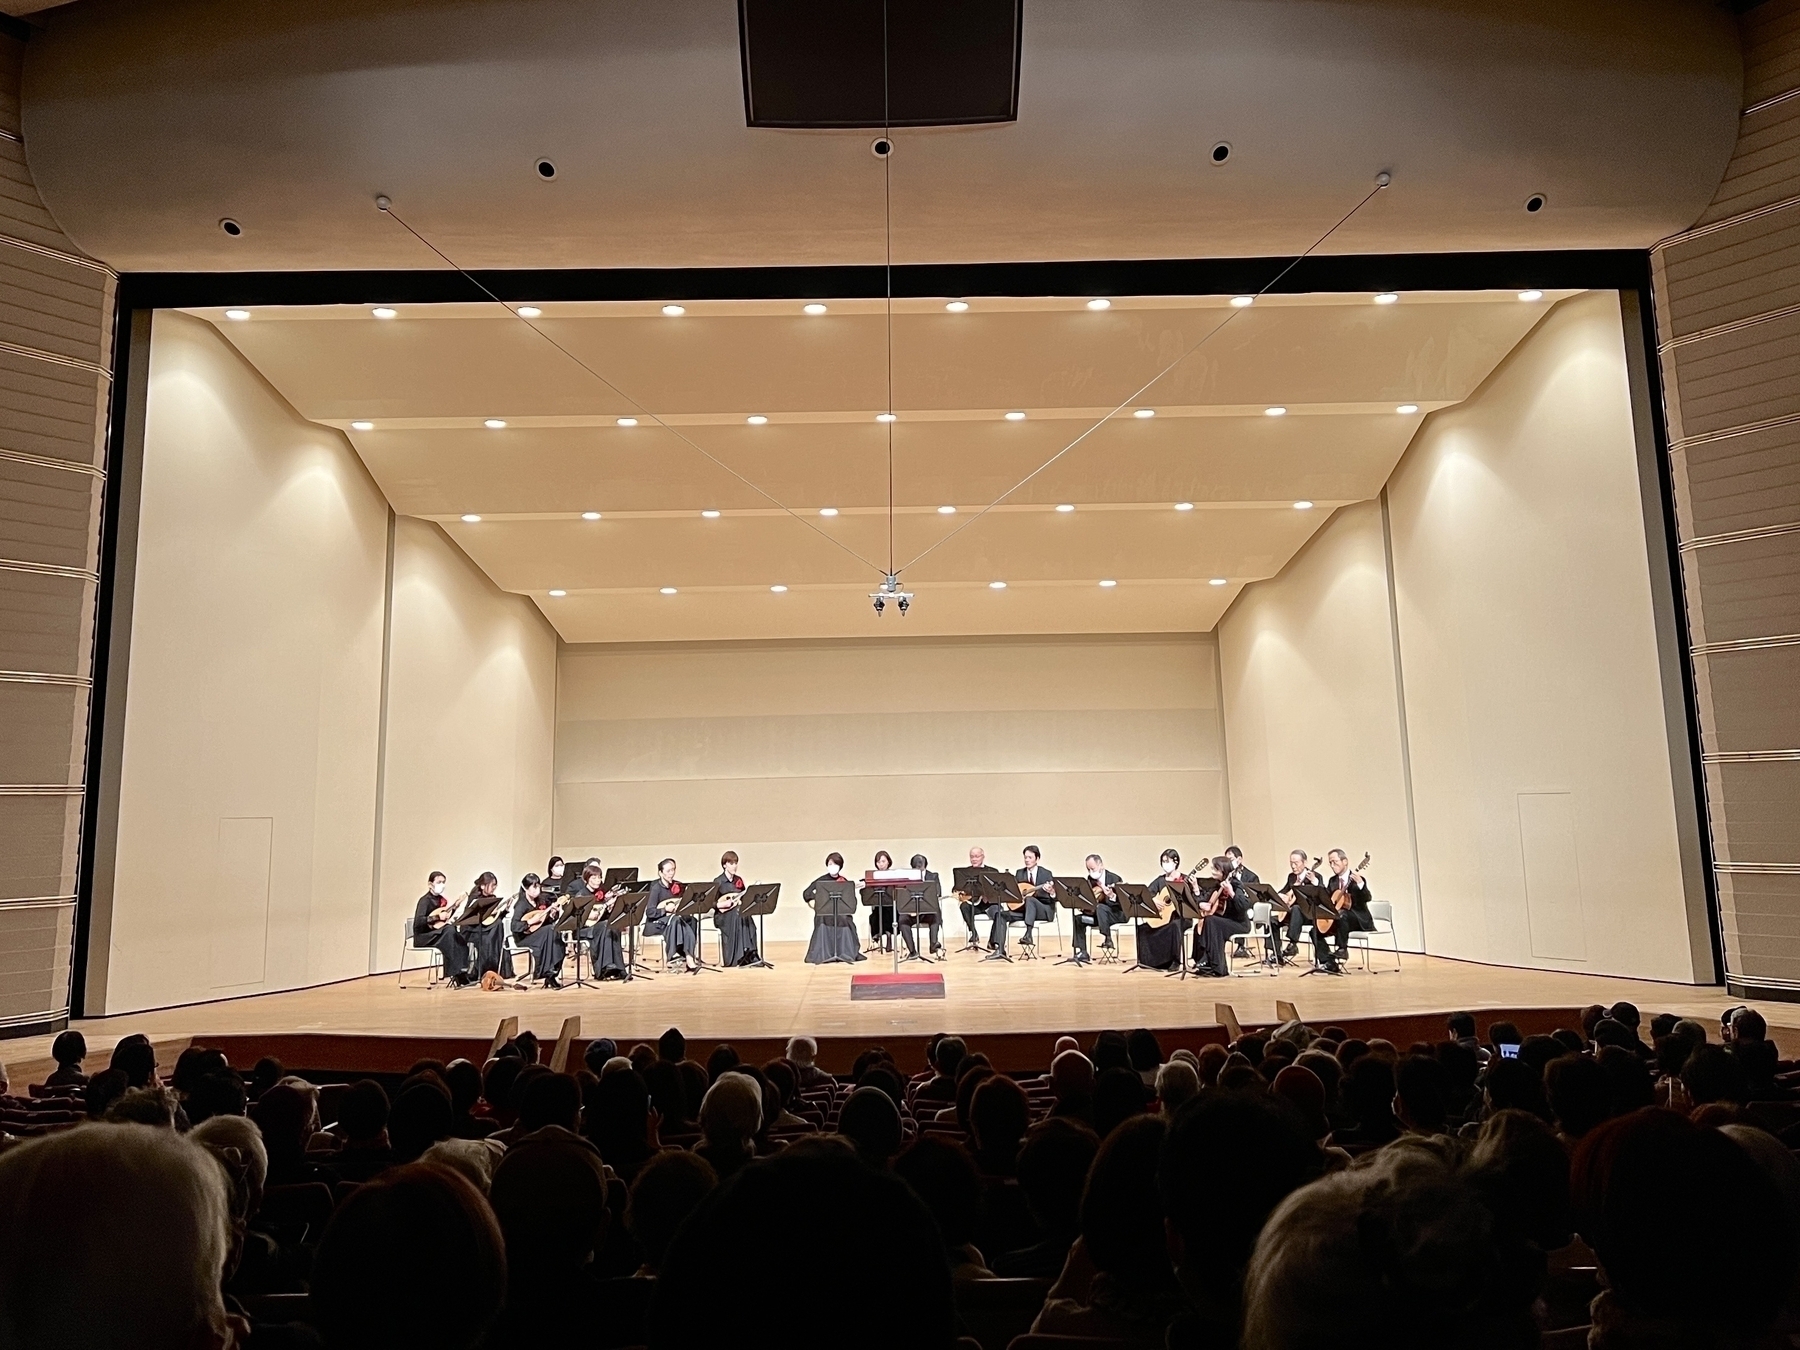 A 24 piece orchestra of mandolins, guitars, and other stringed instruments plays on stage. 